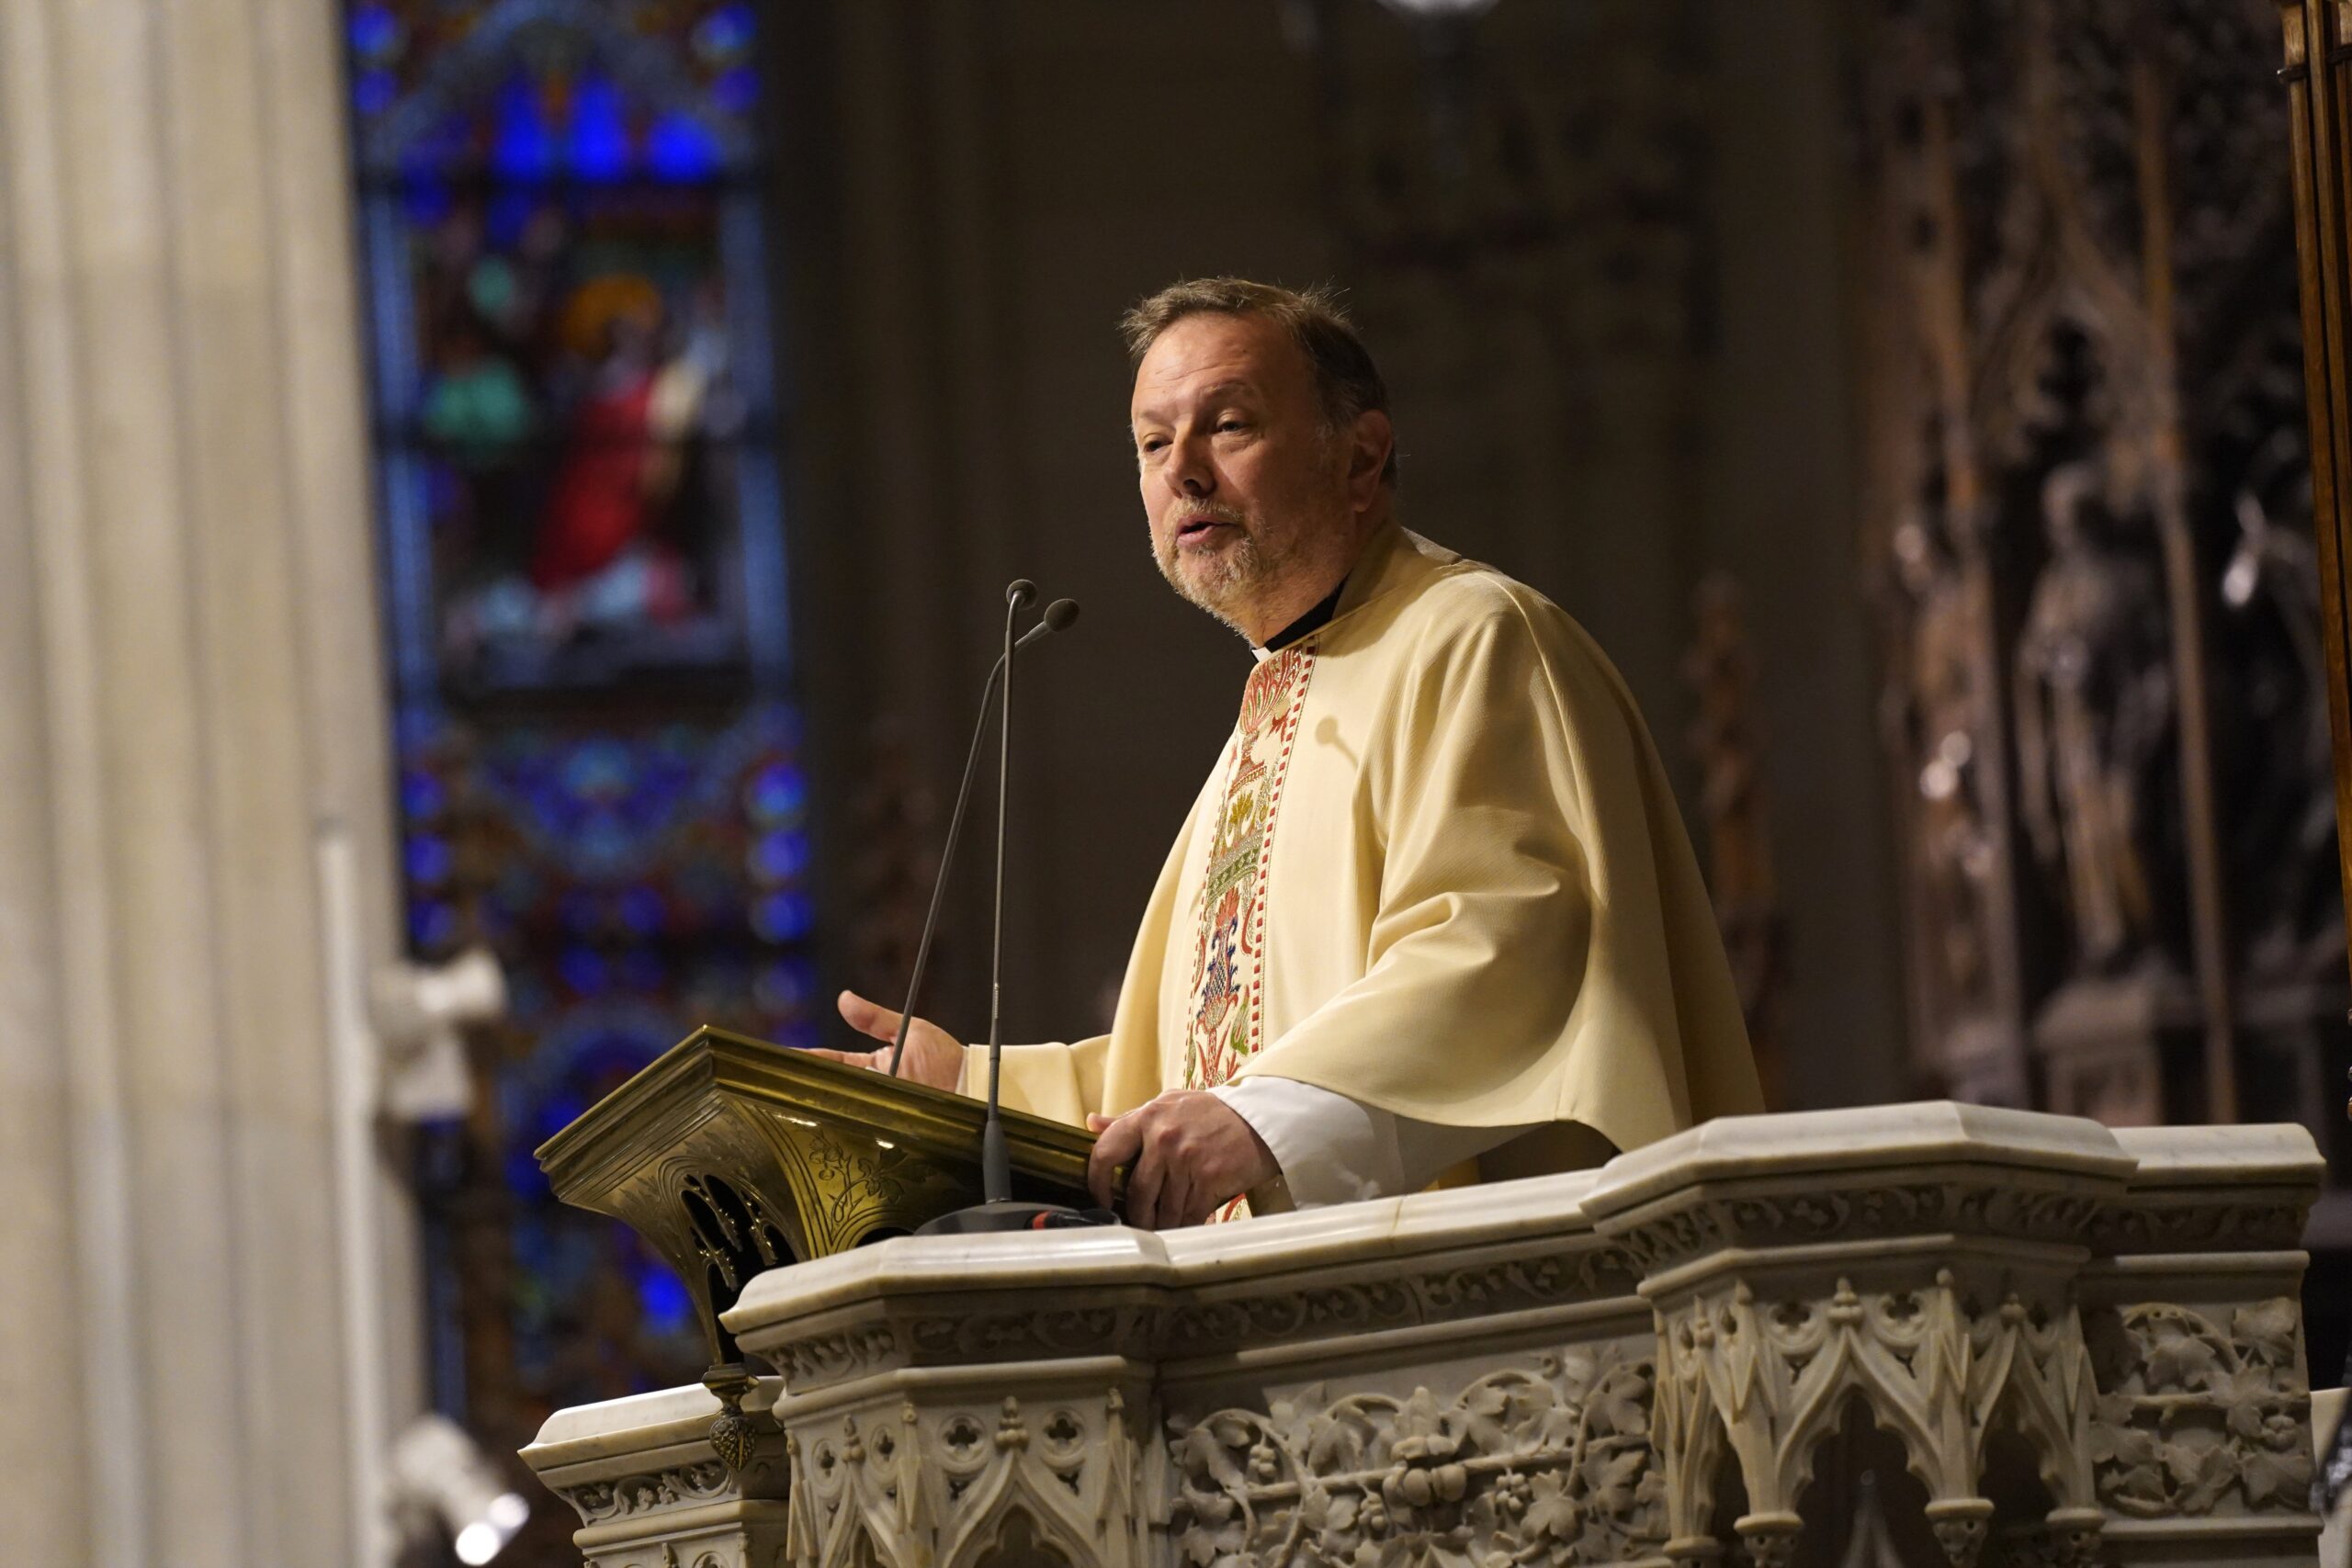 Msgr. Kieran Harrington, national director of the Pontifical Mission Societies-USA, delivers the homily during the St. Patrick's Day Mass at St. Patrick's Cathedral in New York City March 17, 2023. (OSV News photo/Gregory A. Shemitz)